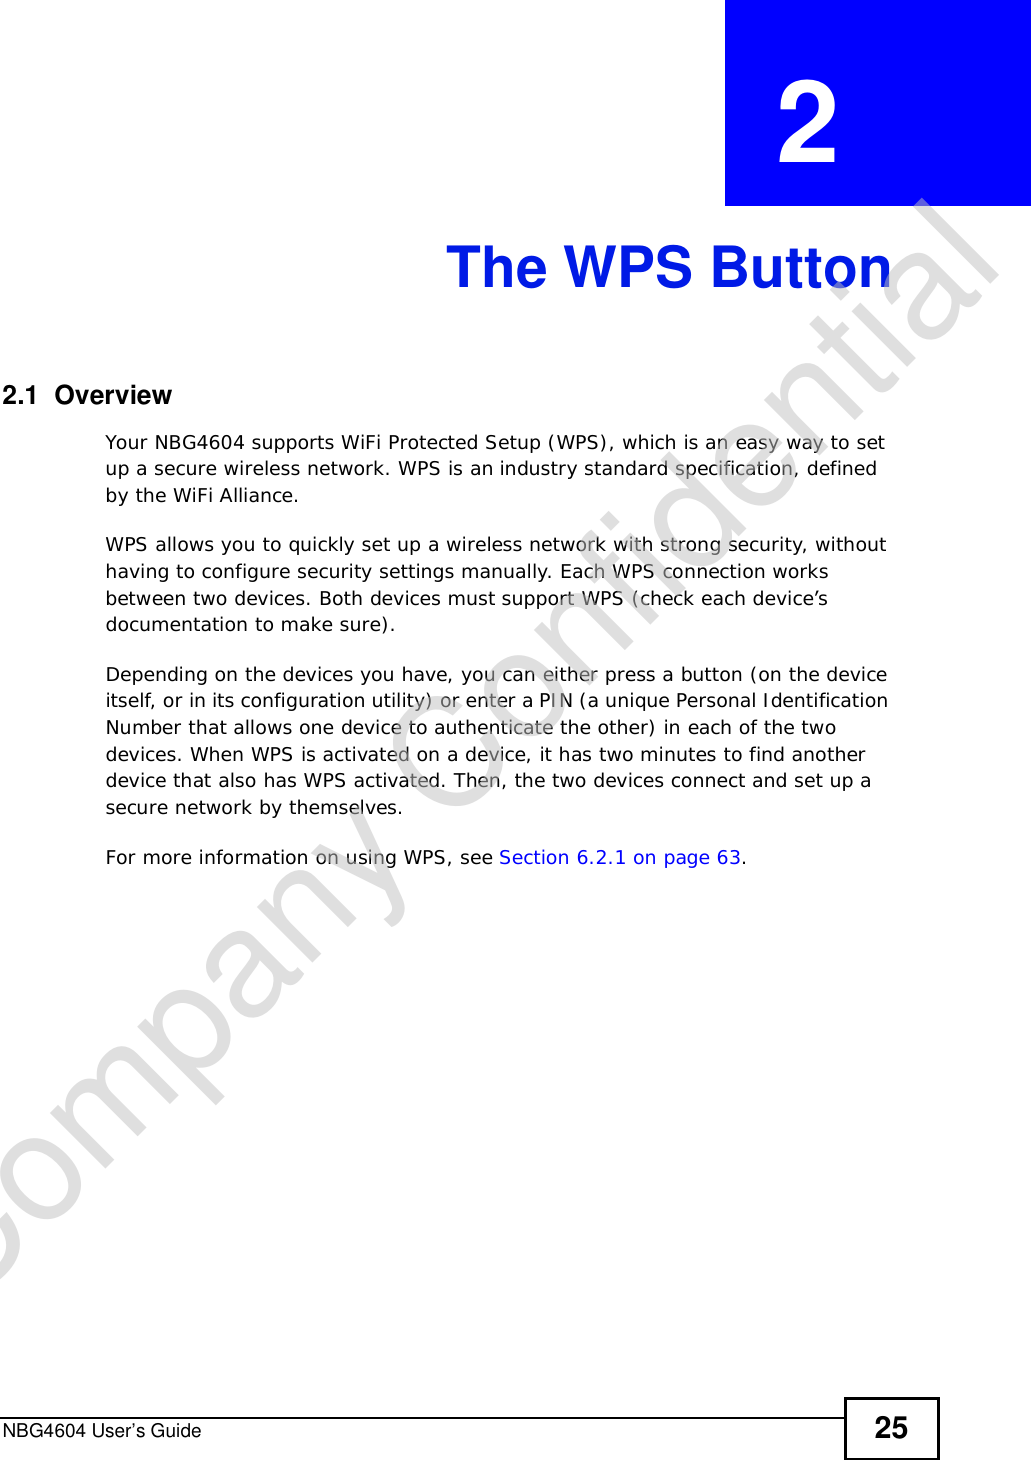 NBG4604 User’s Guide 25CHAPTER  2 The WPS Button2.1  OverviewYour NBG4604 supports WiFi Protected Setup (WPS), which is an easy way to set up a secure wireless network. WPS is an industry standard specification, defined by the WiFi Alliance.WPS allows you to quickly set up a wireless network with strong security, without having to configure security settings manually. Each WPS connection works between two devices. Both devices must support WPS (check each device’s documentation to make sure). Depending on the devices you have, you can either press a button (on the device itself, or in its configuration utility) or enter a PIN (a unique Personal Identification Number that allows one device to authenticate the other) in each of the two devices. When WPS is activated on a device, it has two minutes to find another device that also has WPS activated. Then, the two devices connect and set up a secure network by themselves.For more information on using WPS, see Section 6.2.1 on page 63.Company Confidential